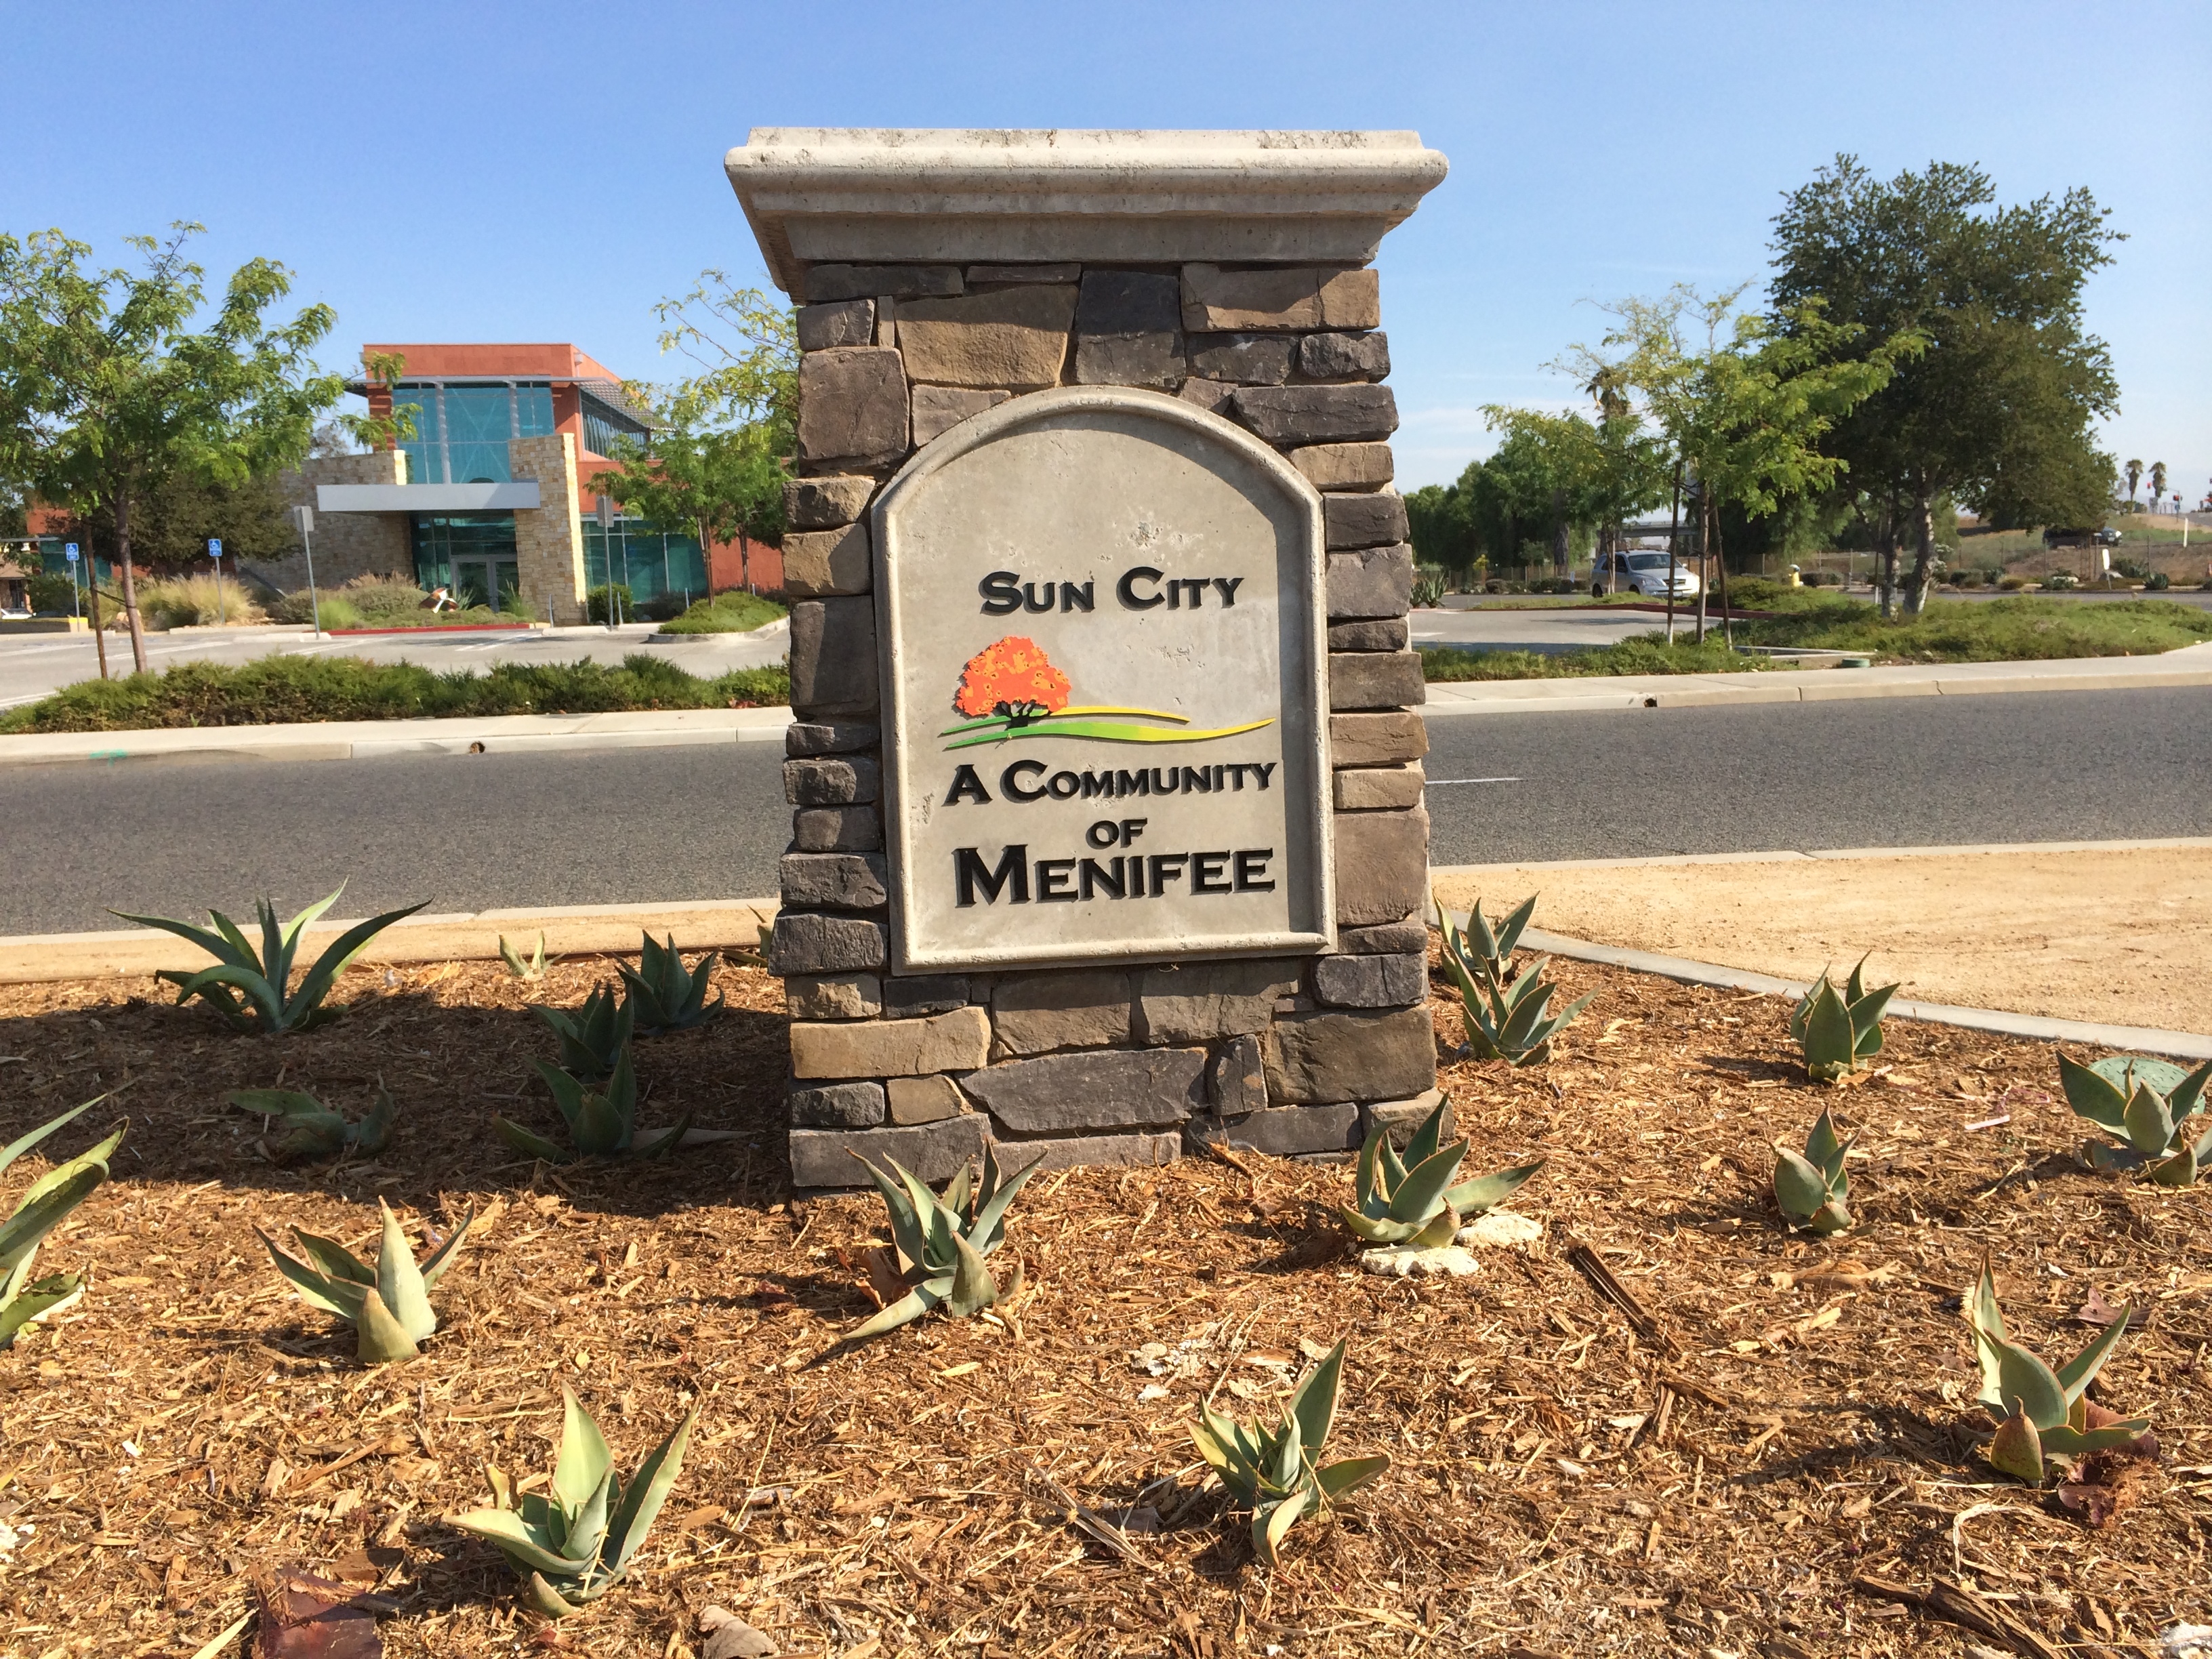 Sun City - A Community of Menifee - Incorporated in 2008